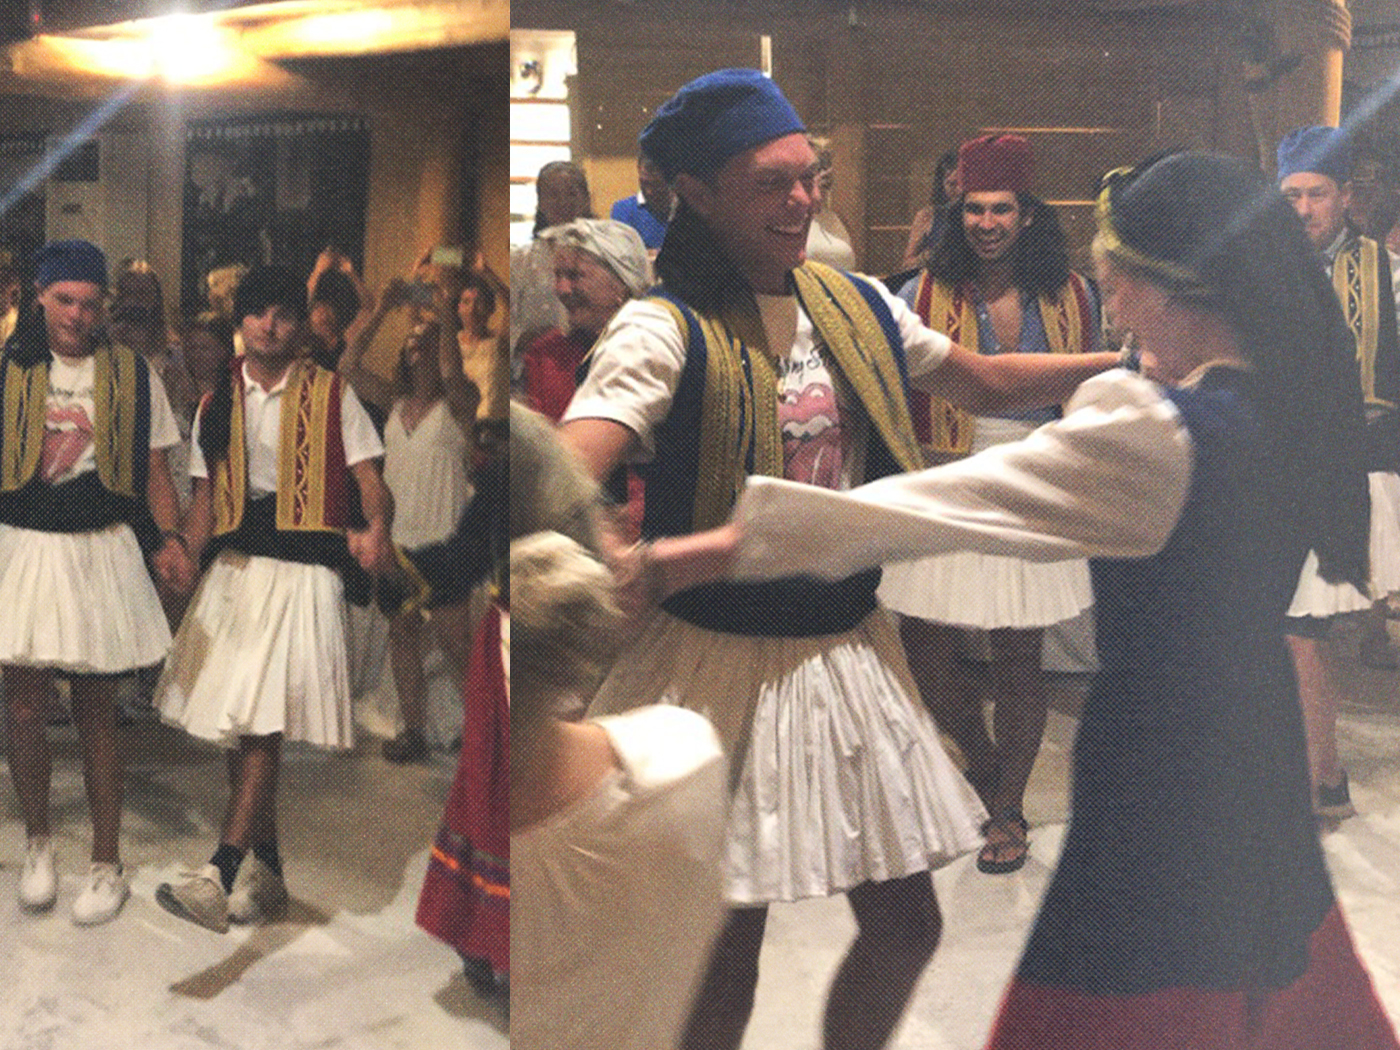 Travelers dancing during Greek Night in Athens as they bond and make student connections